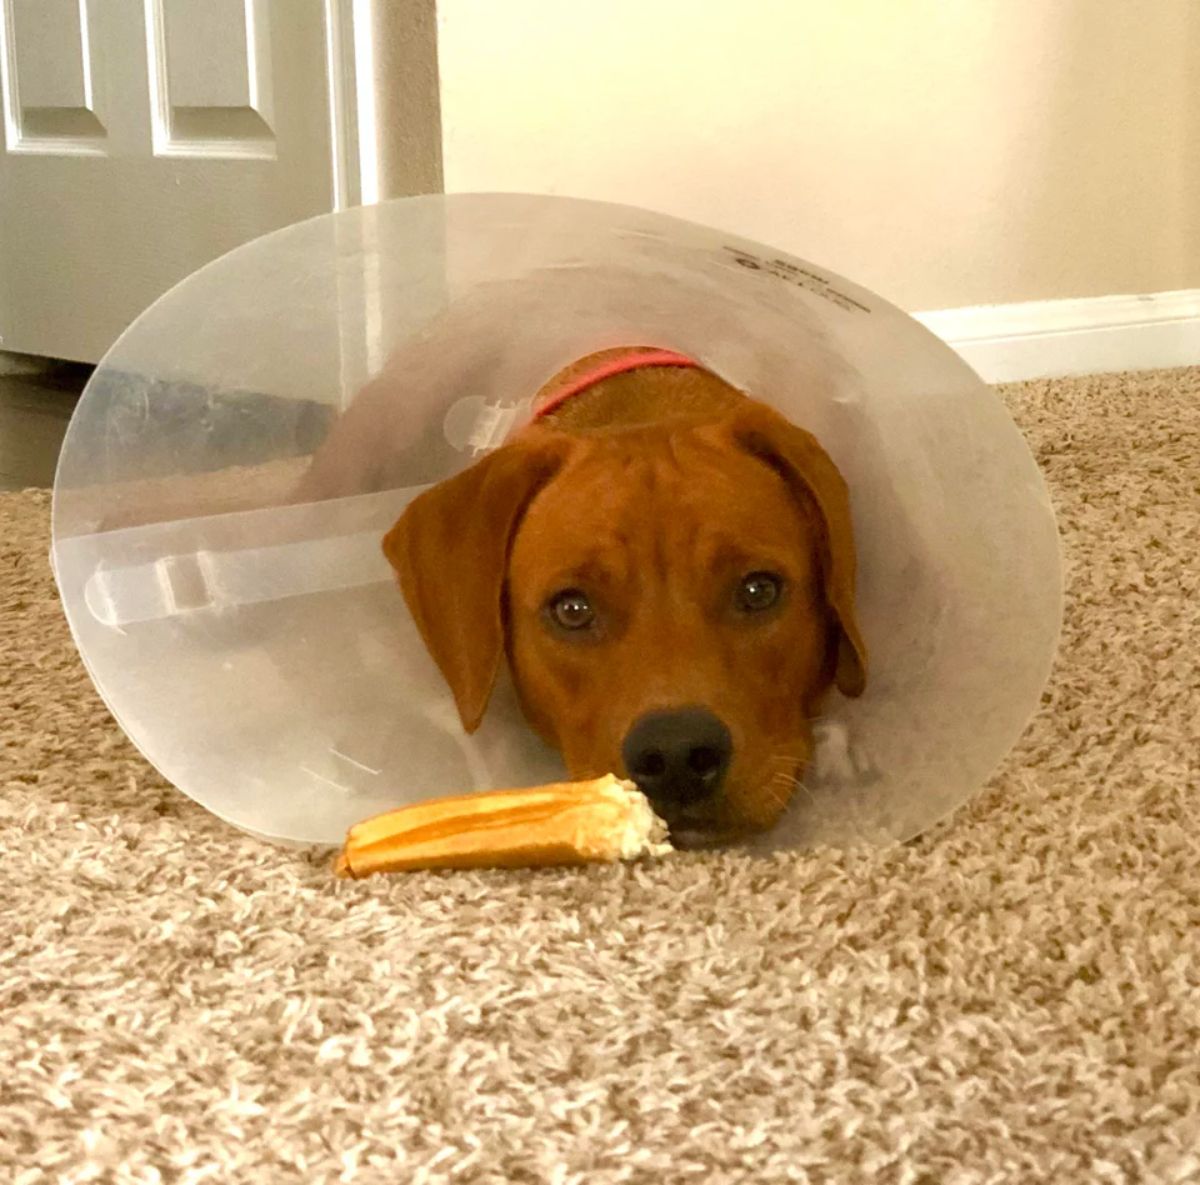 sad brown dog wearing a transparent cone of shame laying on the floor with a half eaten brown treat in front of the face